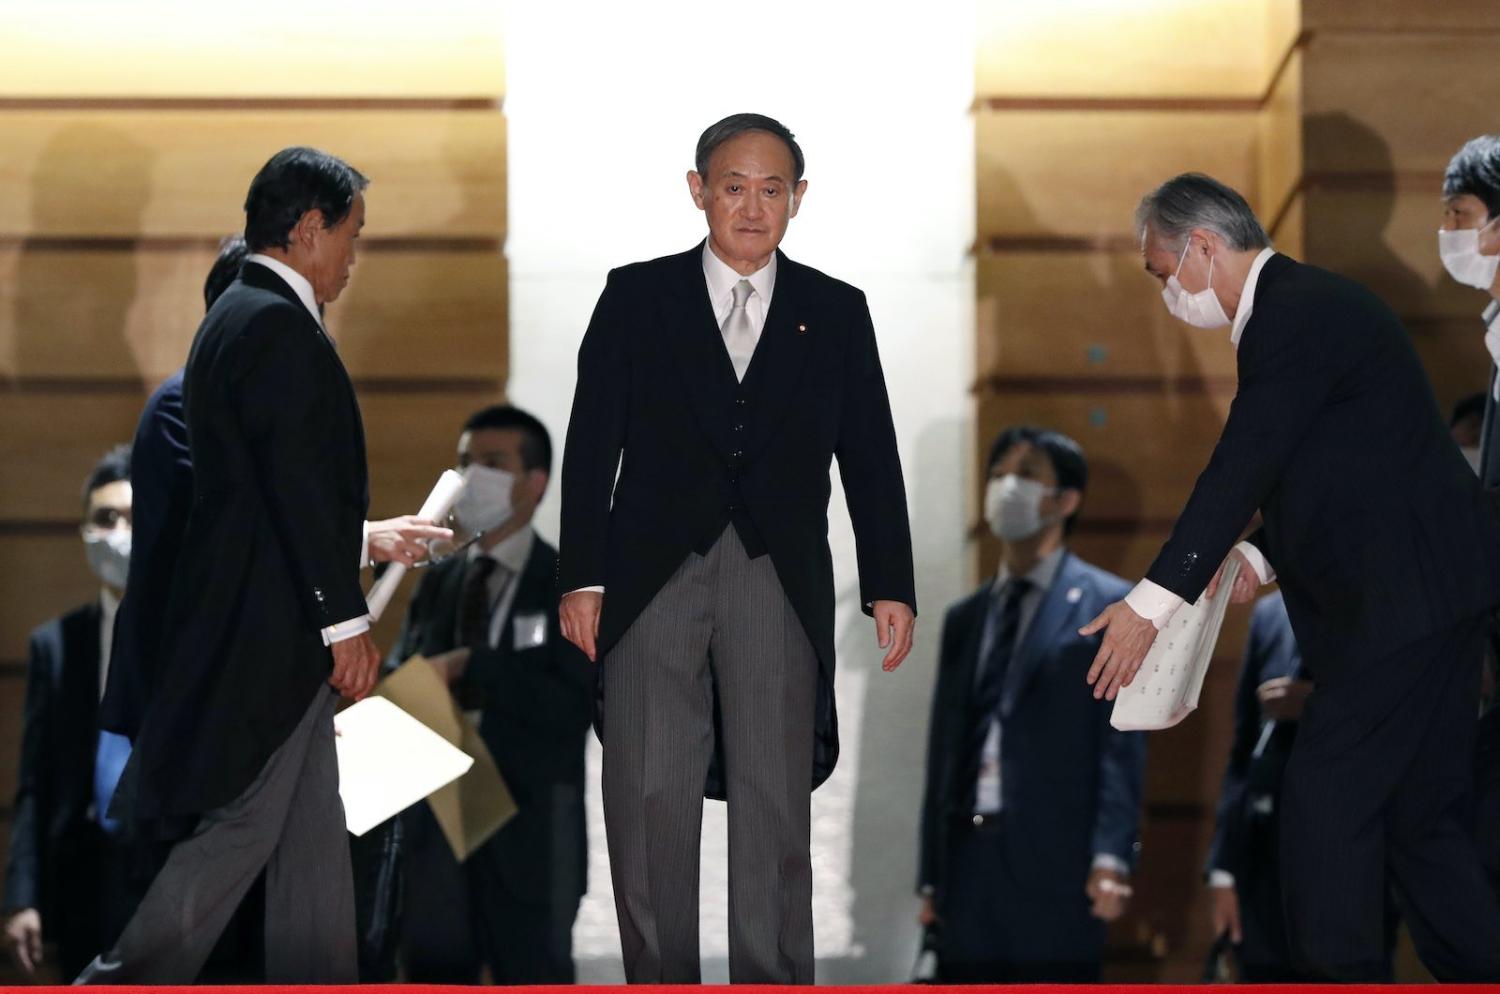 Japan’s Prime Minister Yoshihide Suga arrives for a group photograph with his cabinet at the prime minister’s residence, 16 September 2020 in Tokyo (Issei Kato/Pool/Getty Images)